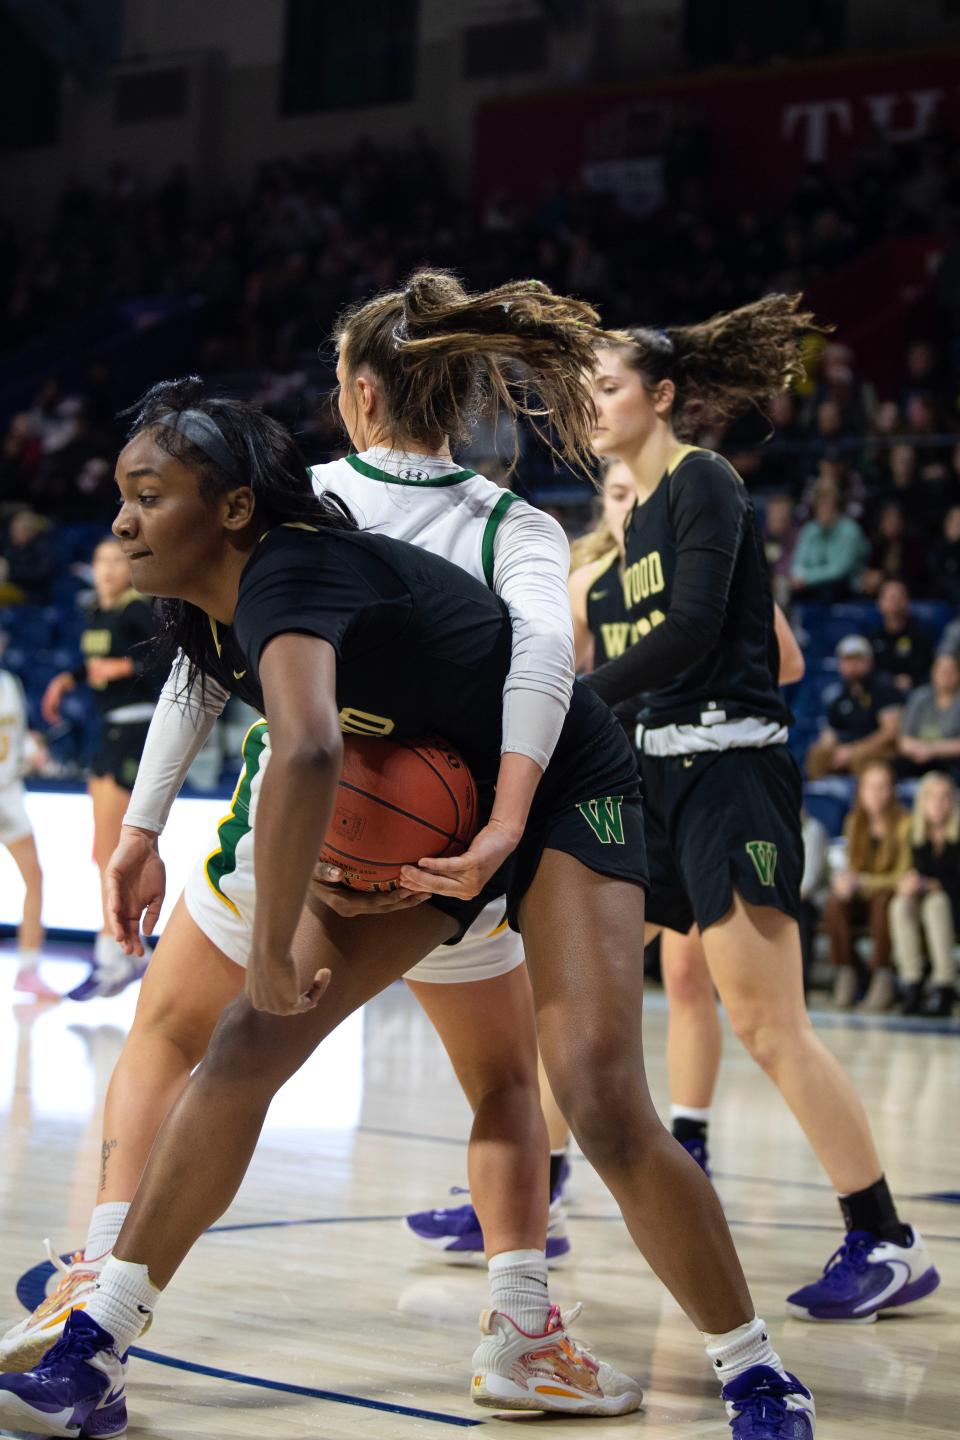 Archbishop Wood senior Deja Evans fights for the ball during the PCL girls basketball final game at the Palestra in Philadelphia on Monday, Feb. 27, 2023.